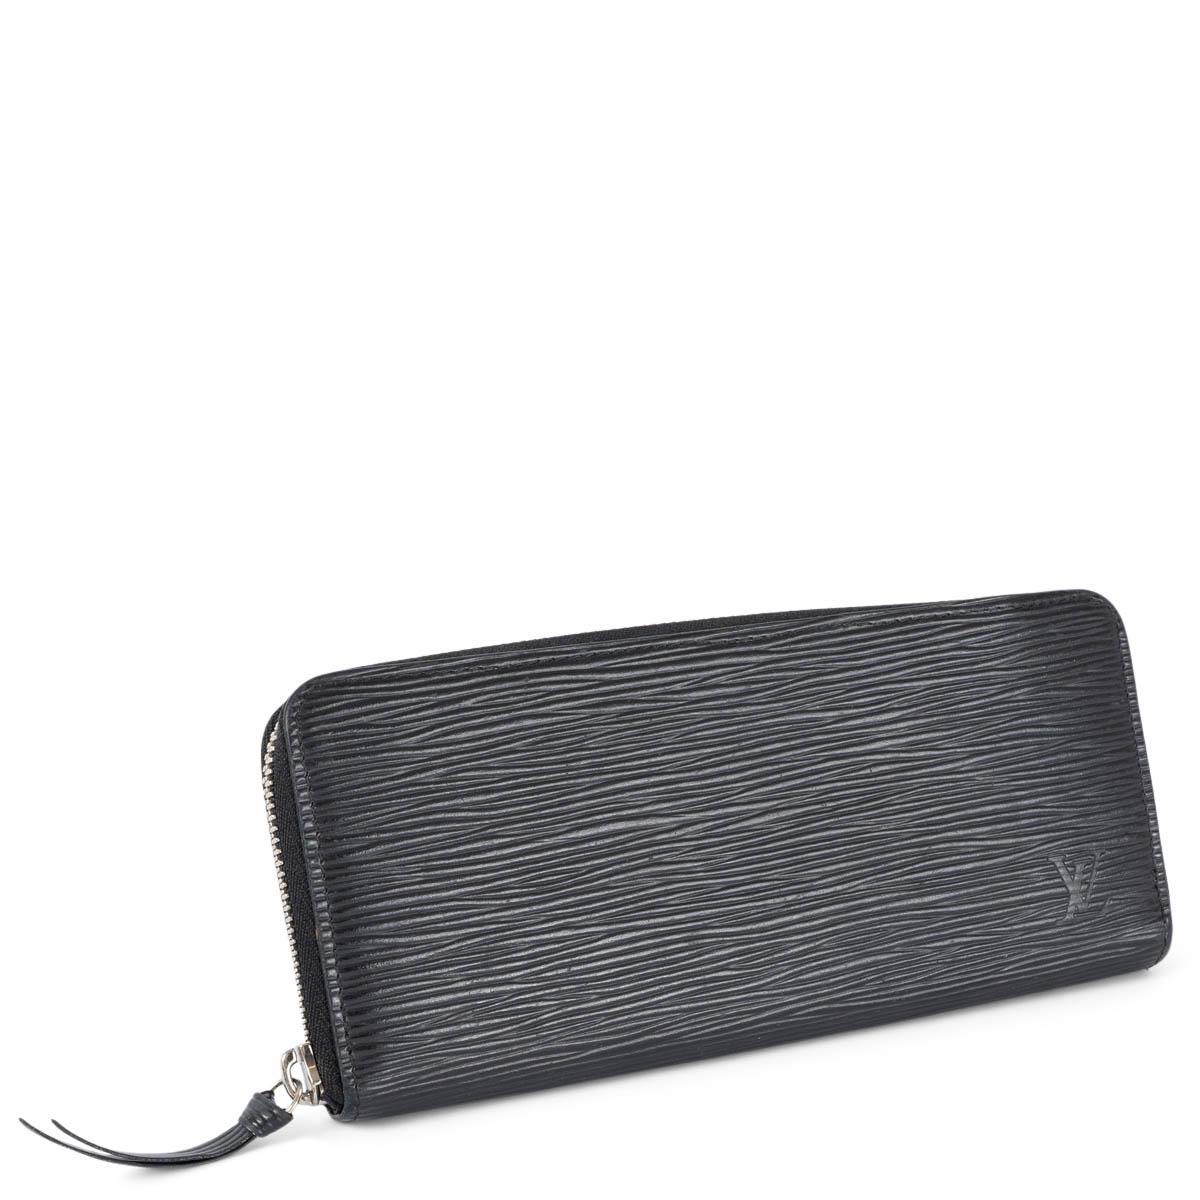 100% authentic Louis Vuitton Clemence wallet in black Epi leather featuring silver-tone hardware. Opens with a zipper on top and eight credit card slots, two bill compartments and a zipped coin pocket in the middle. Has been carried and is in